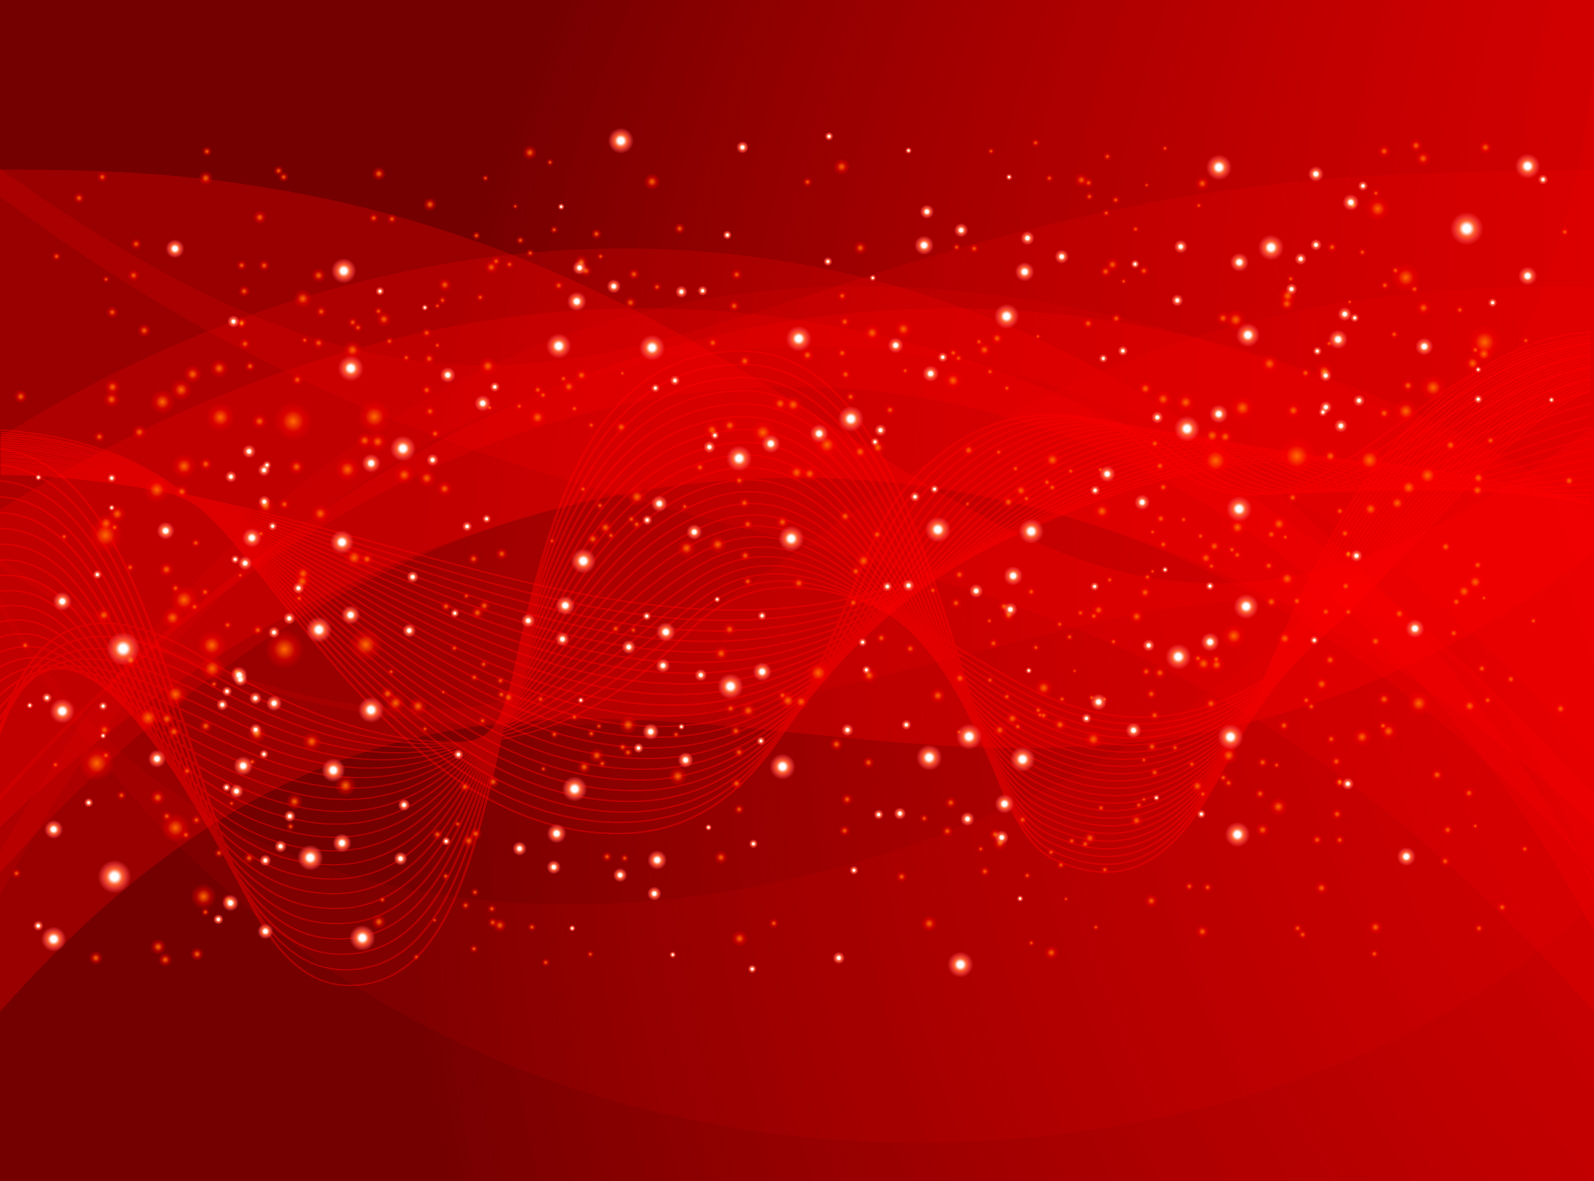 Red Background Wallpaper Image HD 6422 Wallpaper 1594x1181